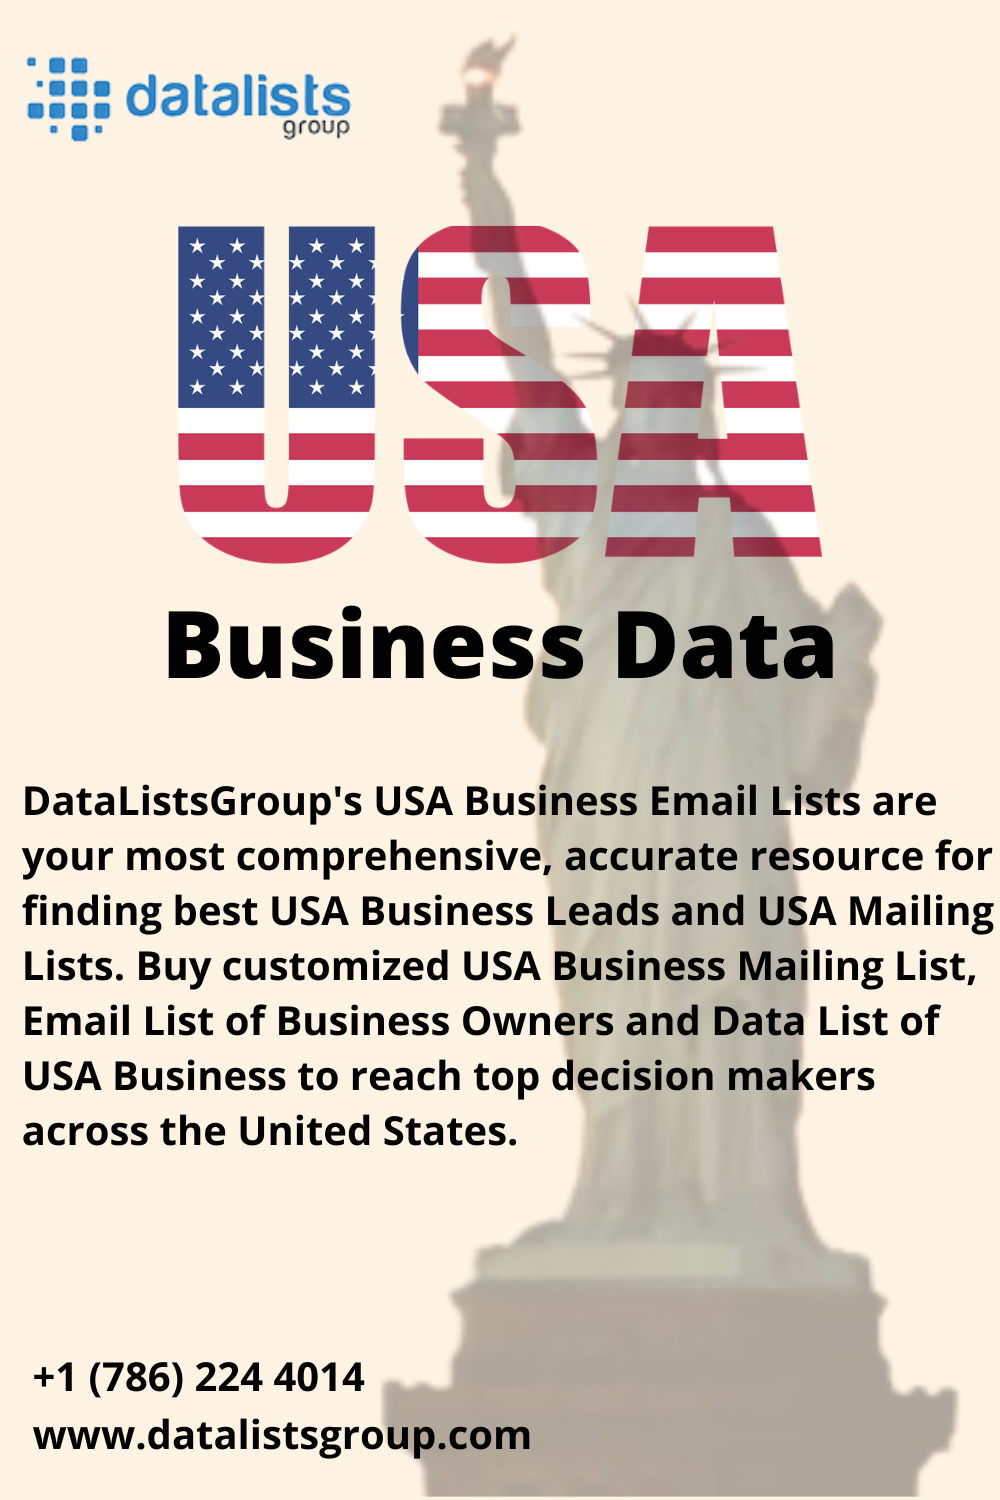 USA businesses lead the way globally